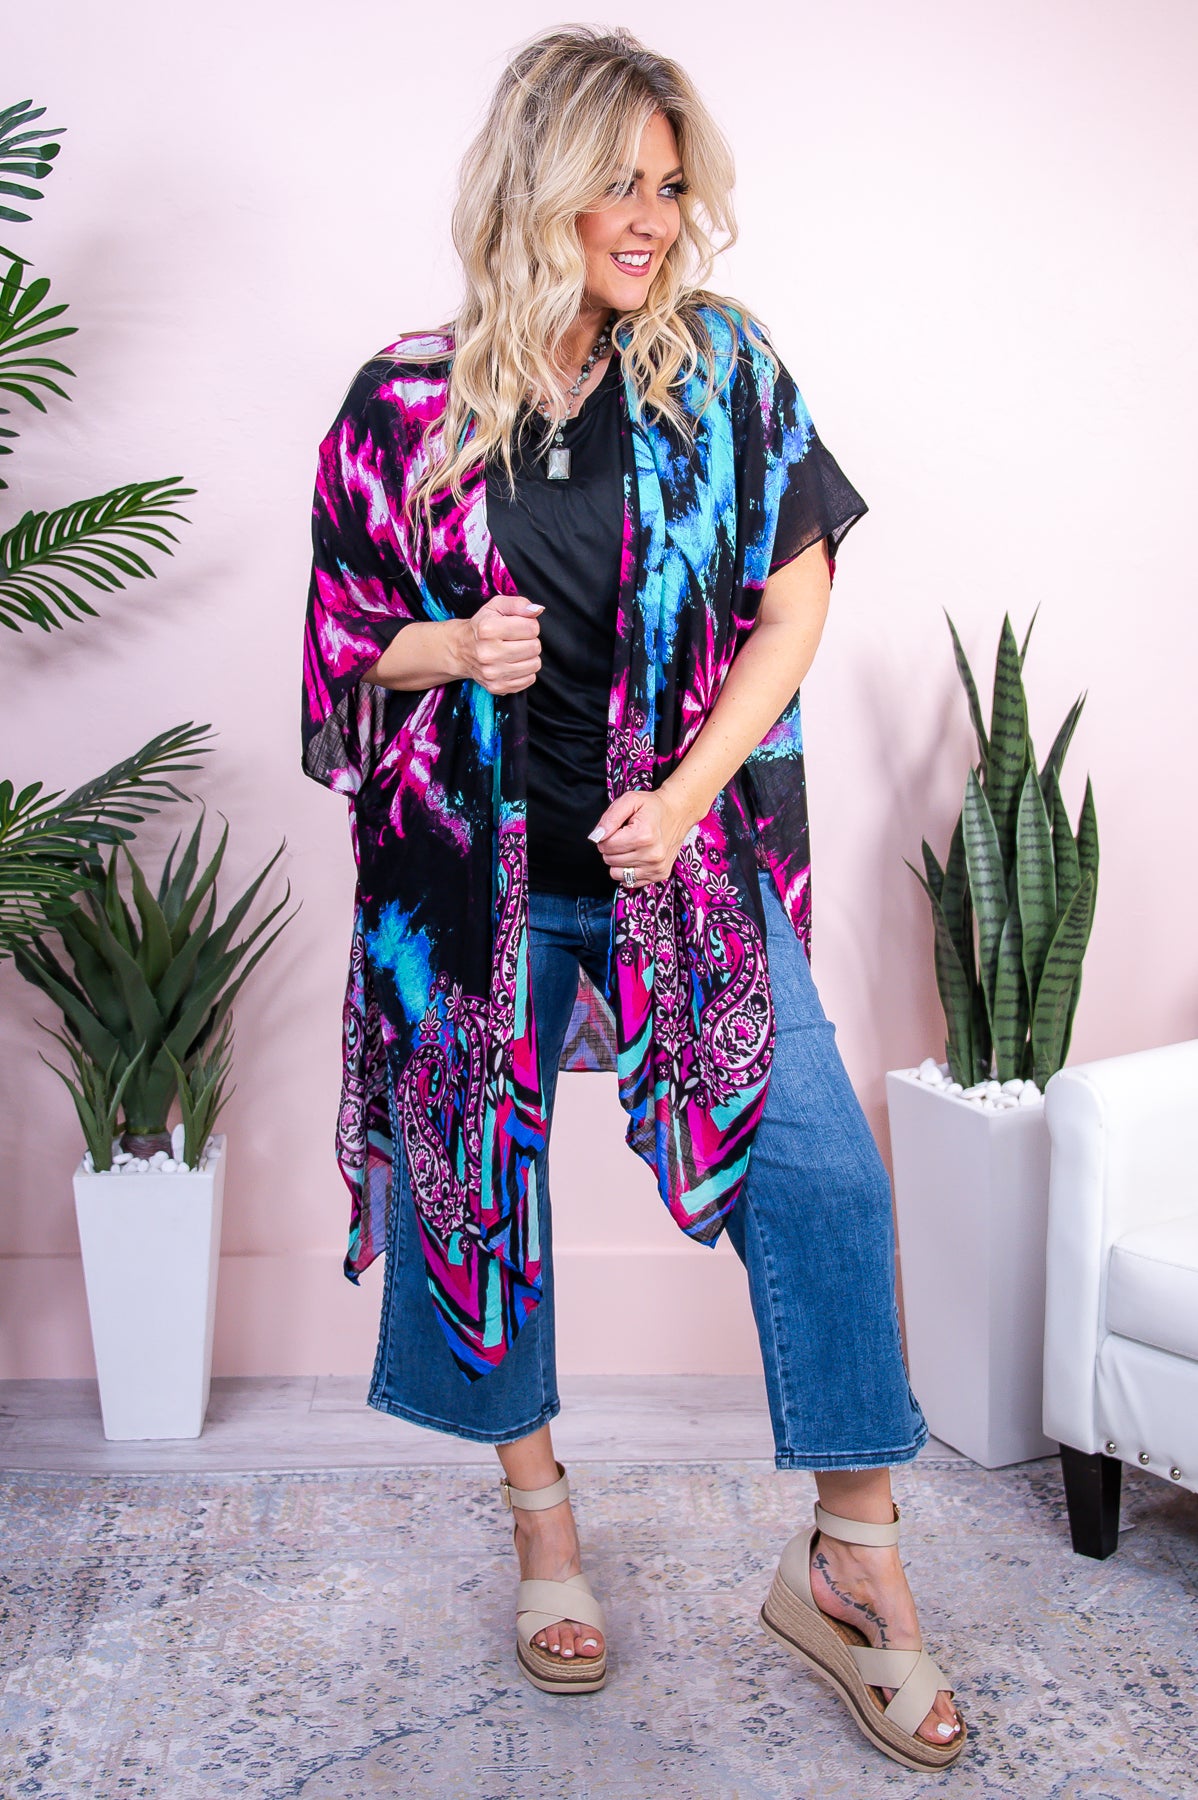 Out Of This World Magenta/Multi Color Paisley/Tie Dye Kimono (One Size 4-18) - O5448MG